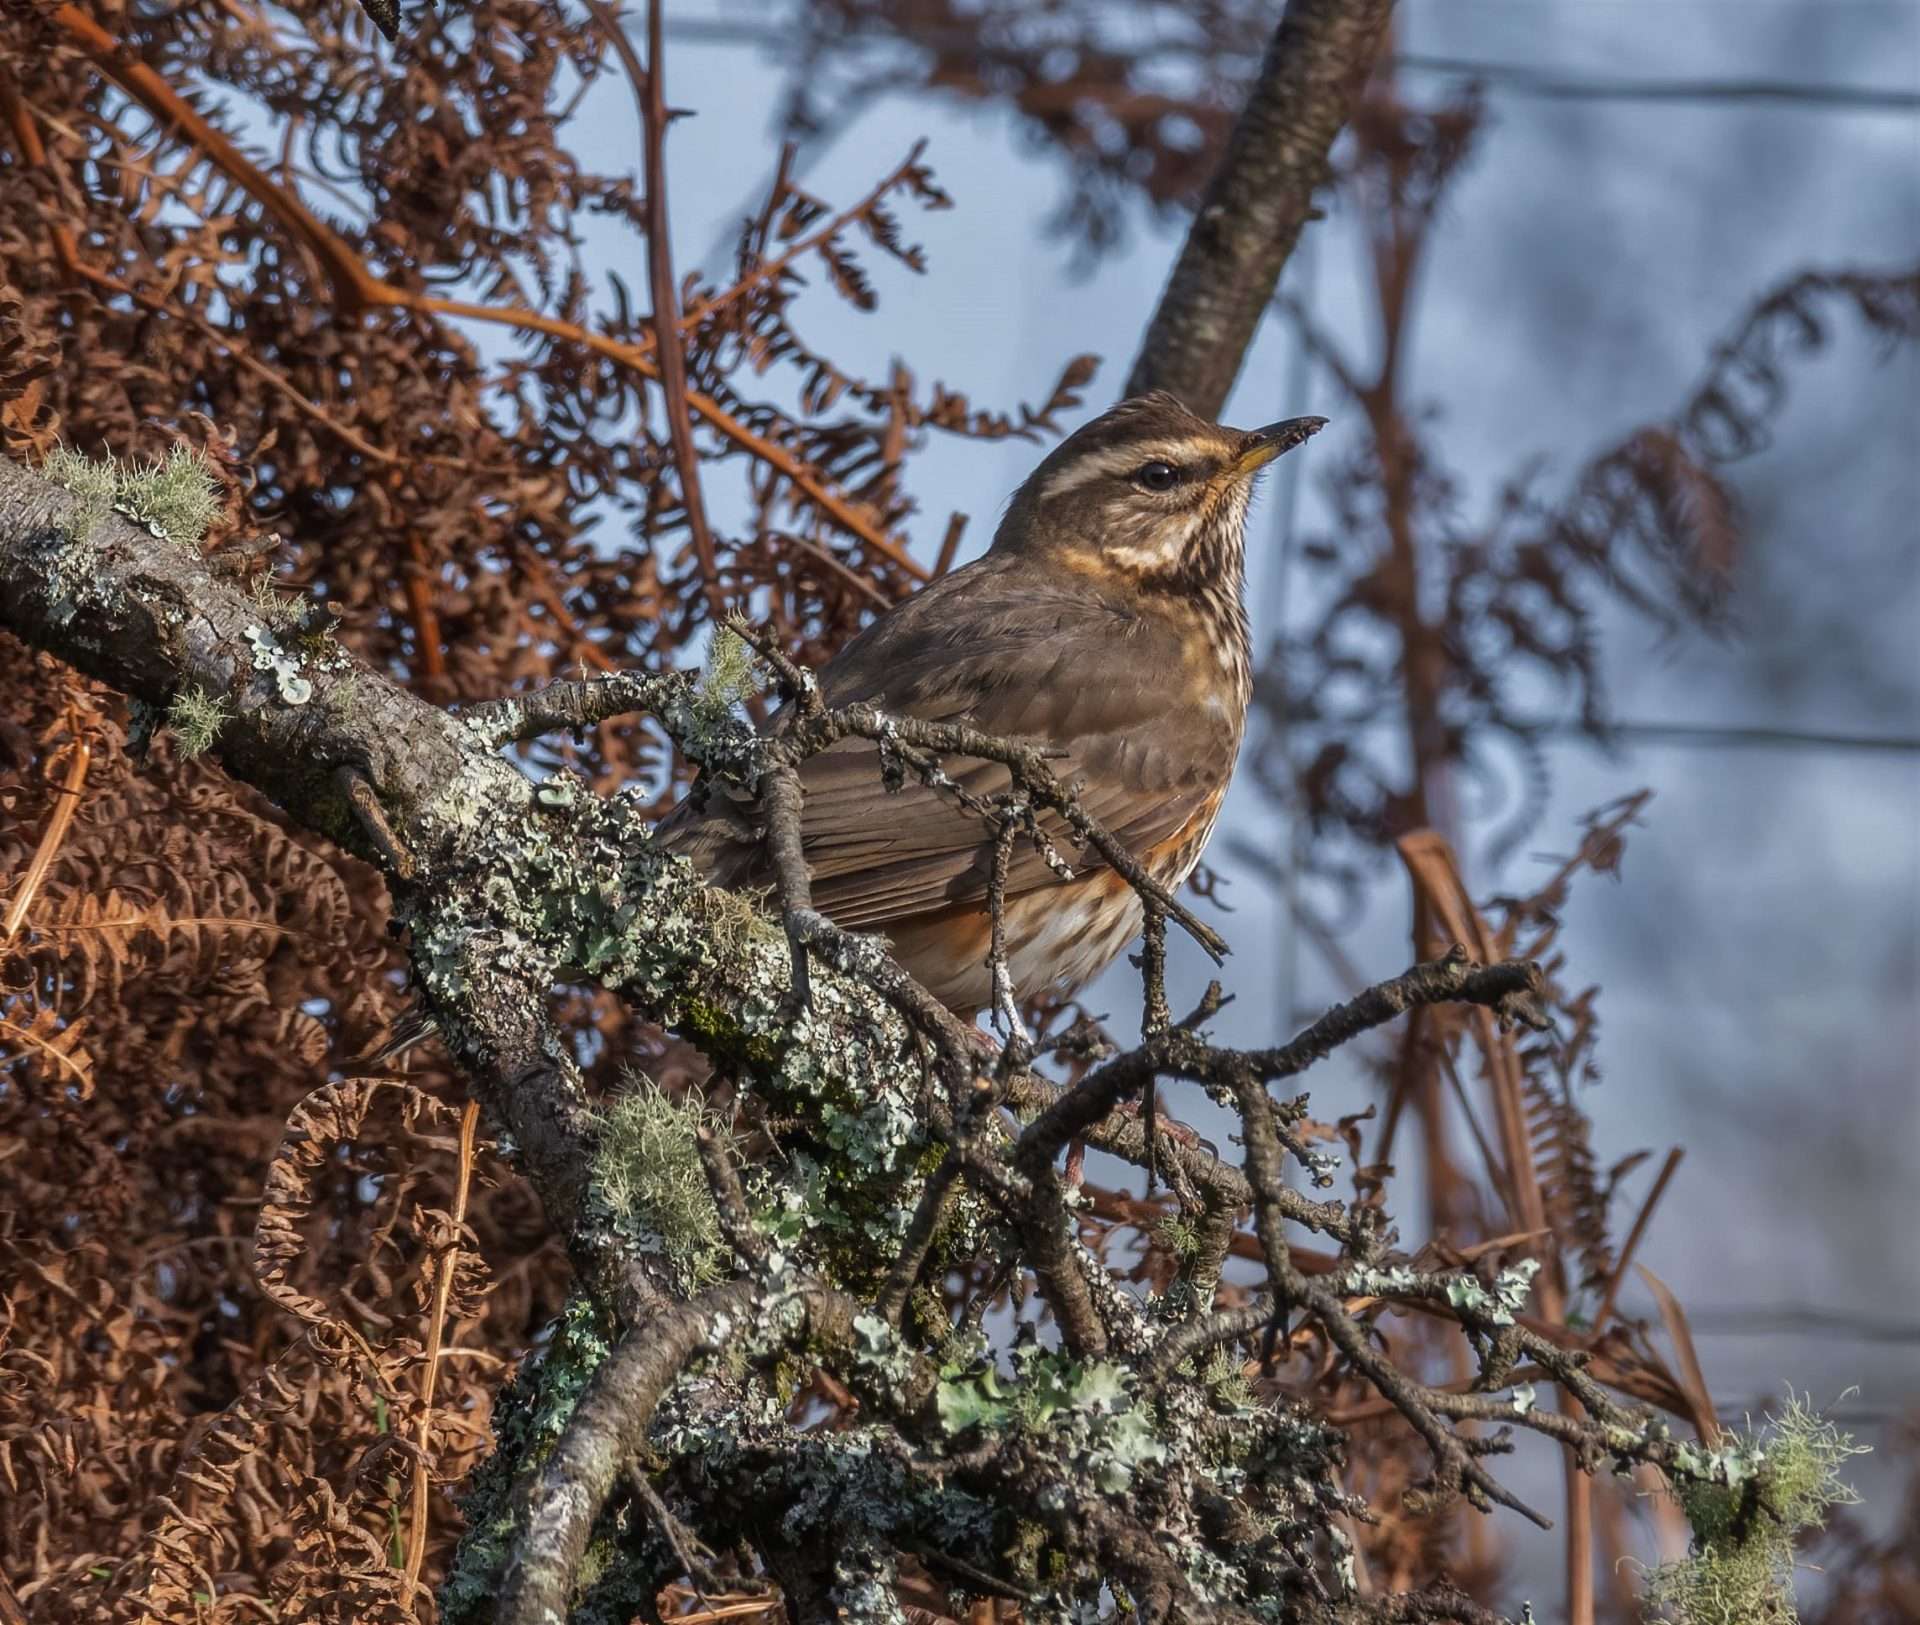 Redwing by Mark Sturman at Cadover